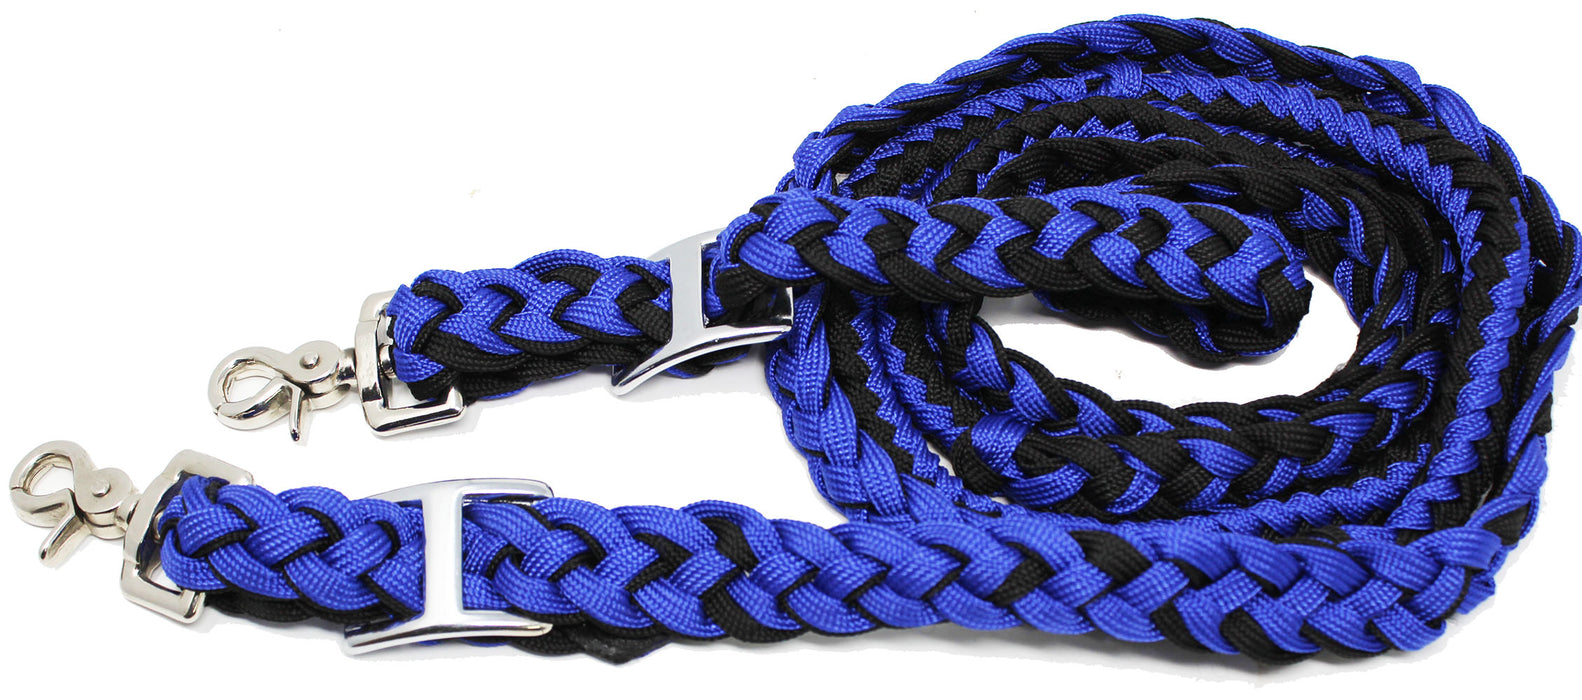 Challenger Horse Nylon Braided Roping Knotted Barrel Reins Royal Blue 60704